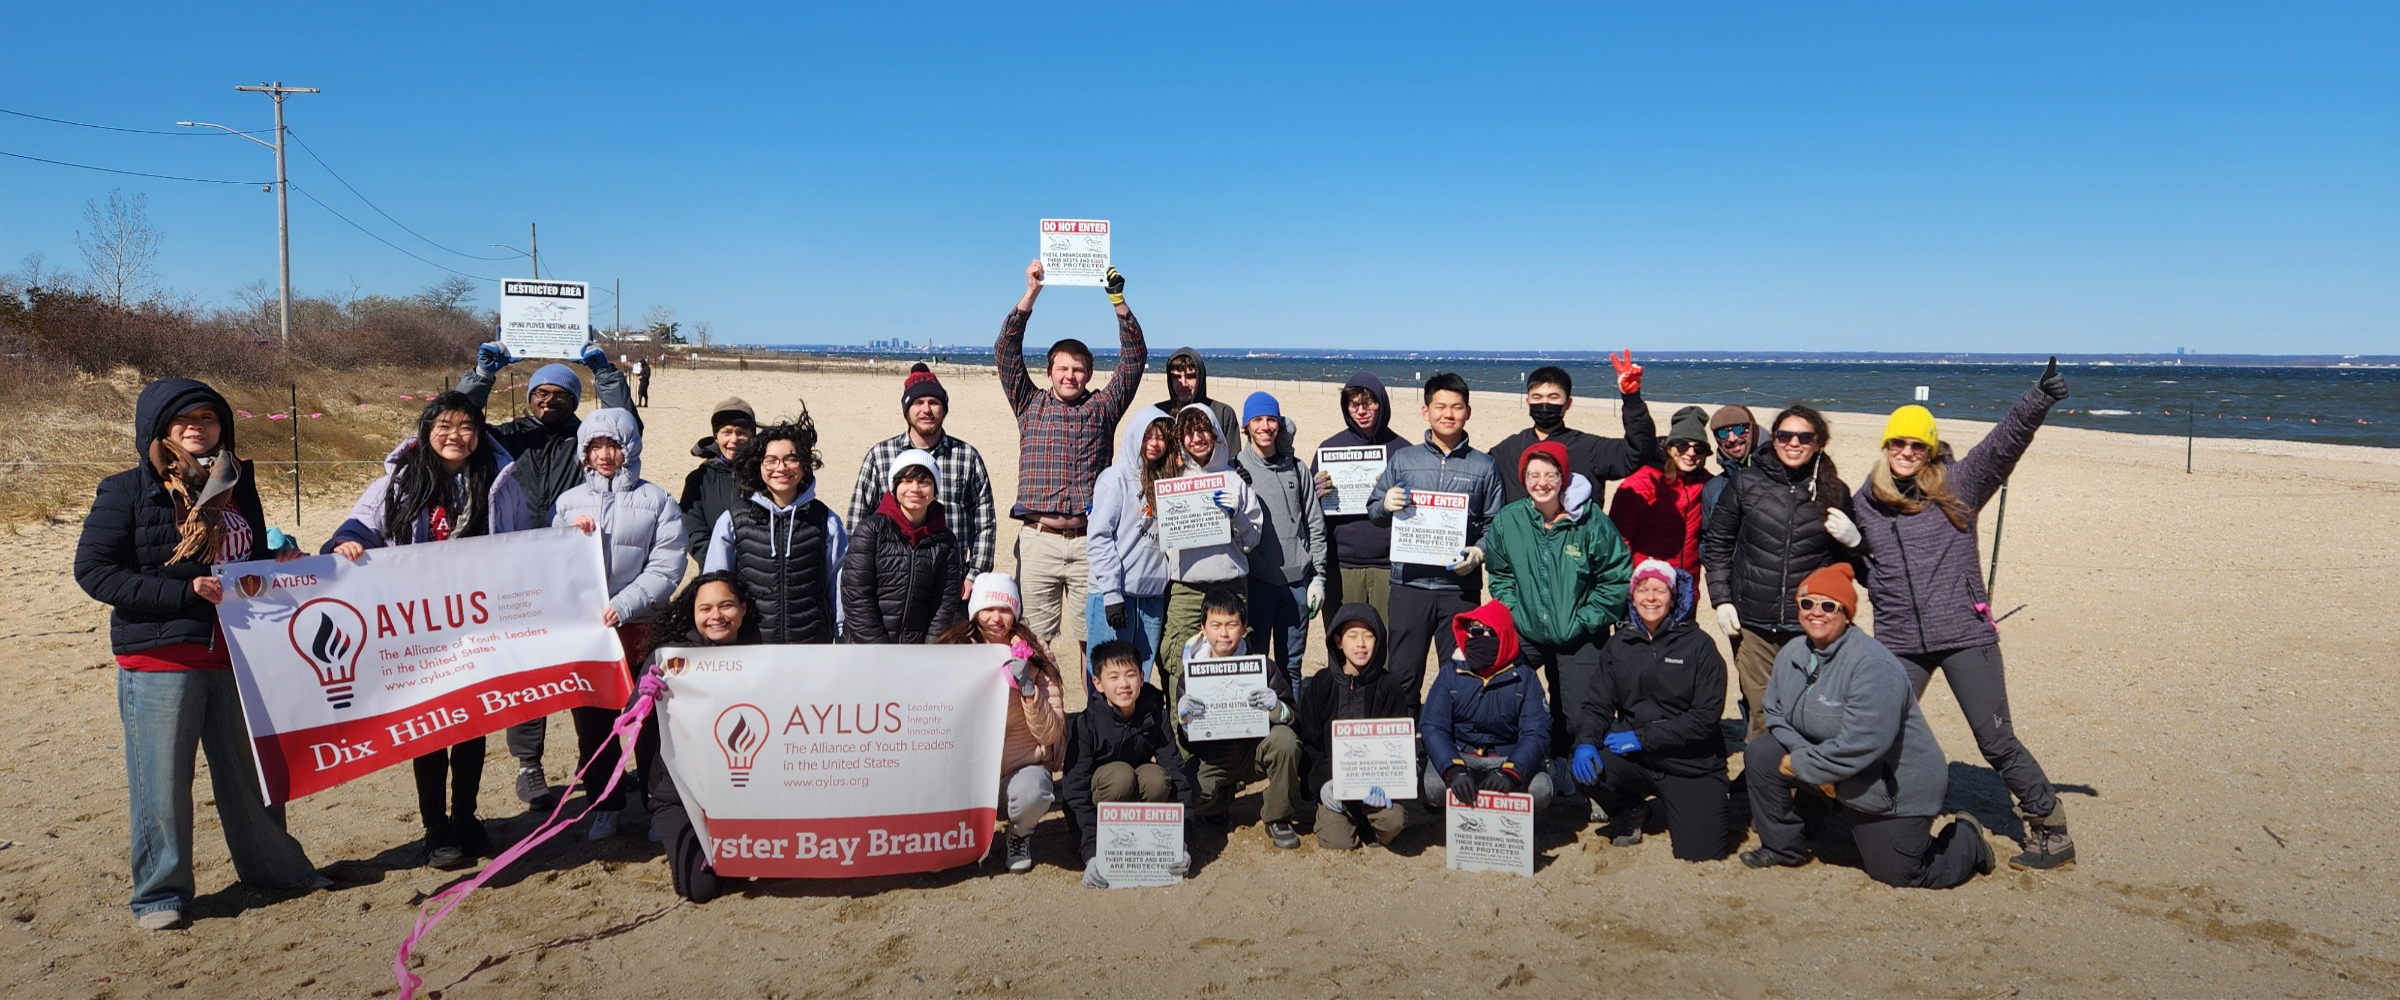 A large group of people stand together on a beach, dressed for cold weather. They are smiling.